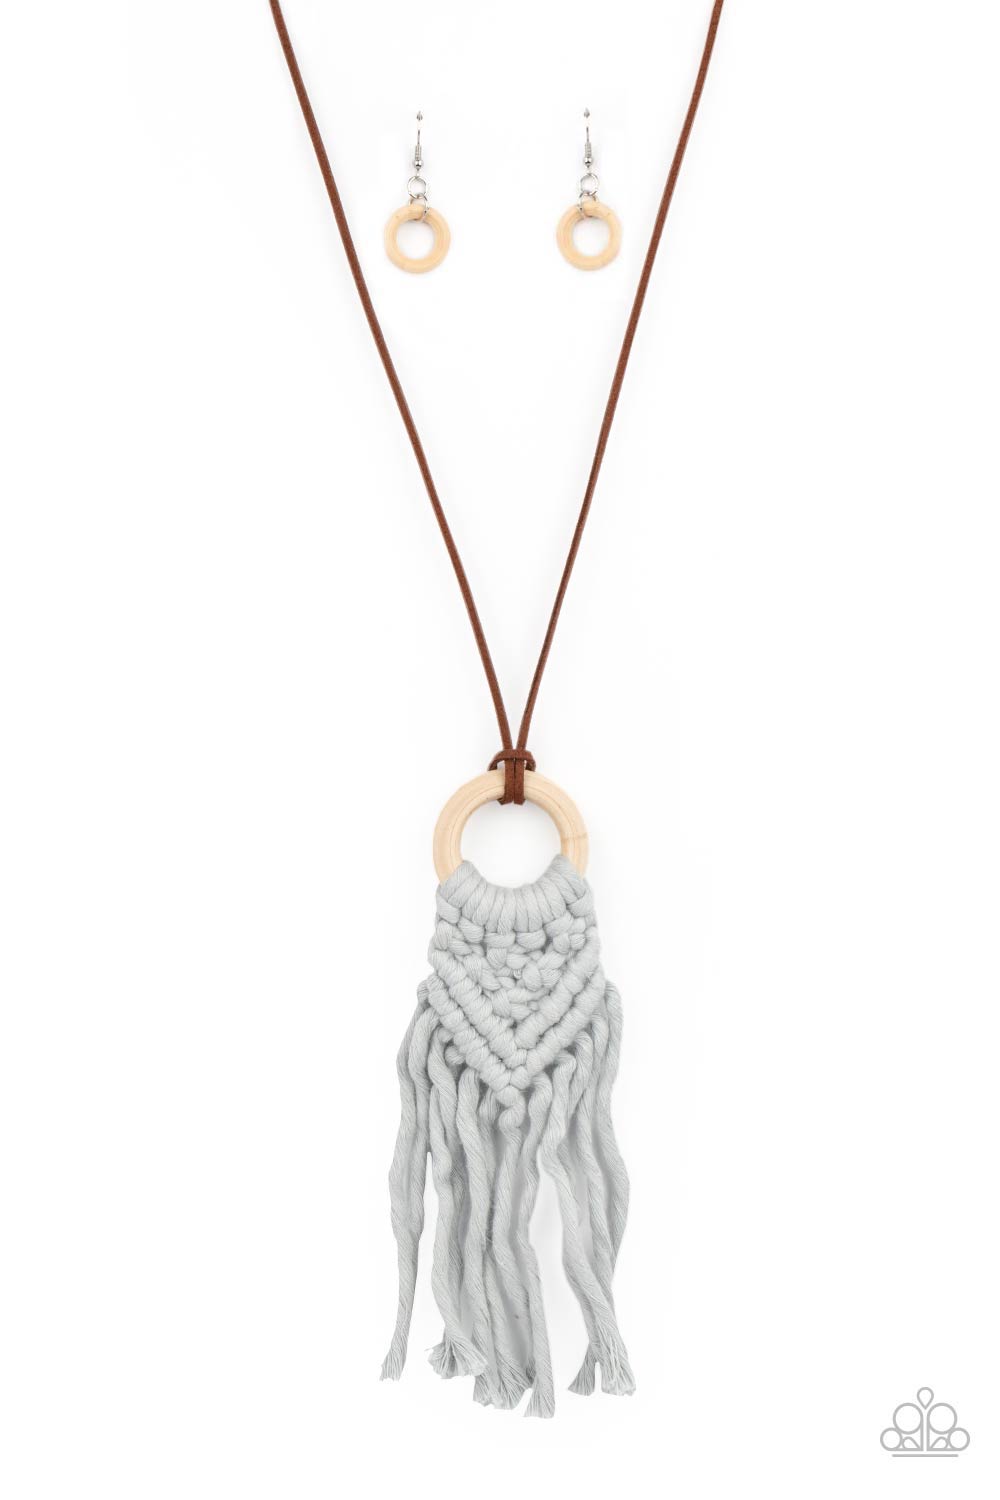 Crafty Couture - Silver Macrame Necklace - Paparazzi Accessories - Strands of gray yarn-like thread delicately weaves into a knotted macrame pattern at the bottom of a white wooden hoop. Dainty strands of brown suede knot around the pendant for an earthy flair. Features an adjustable clasp closure.